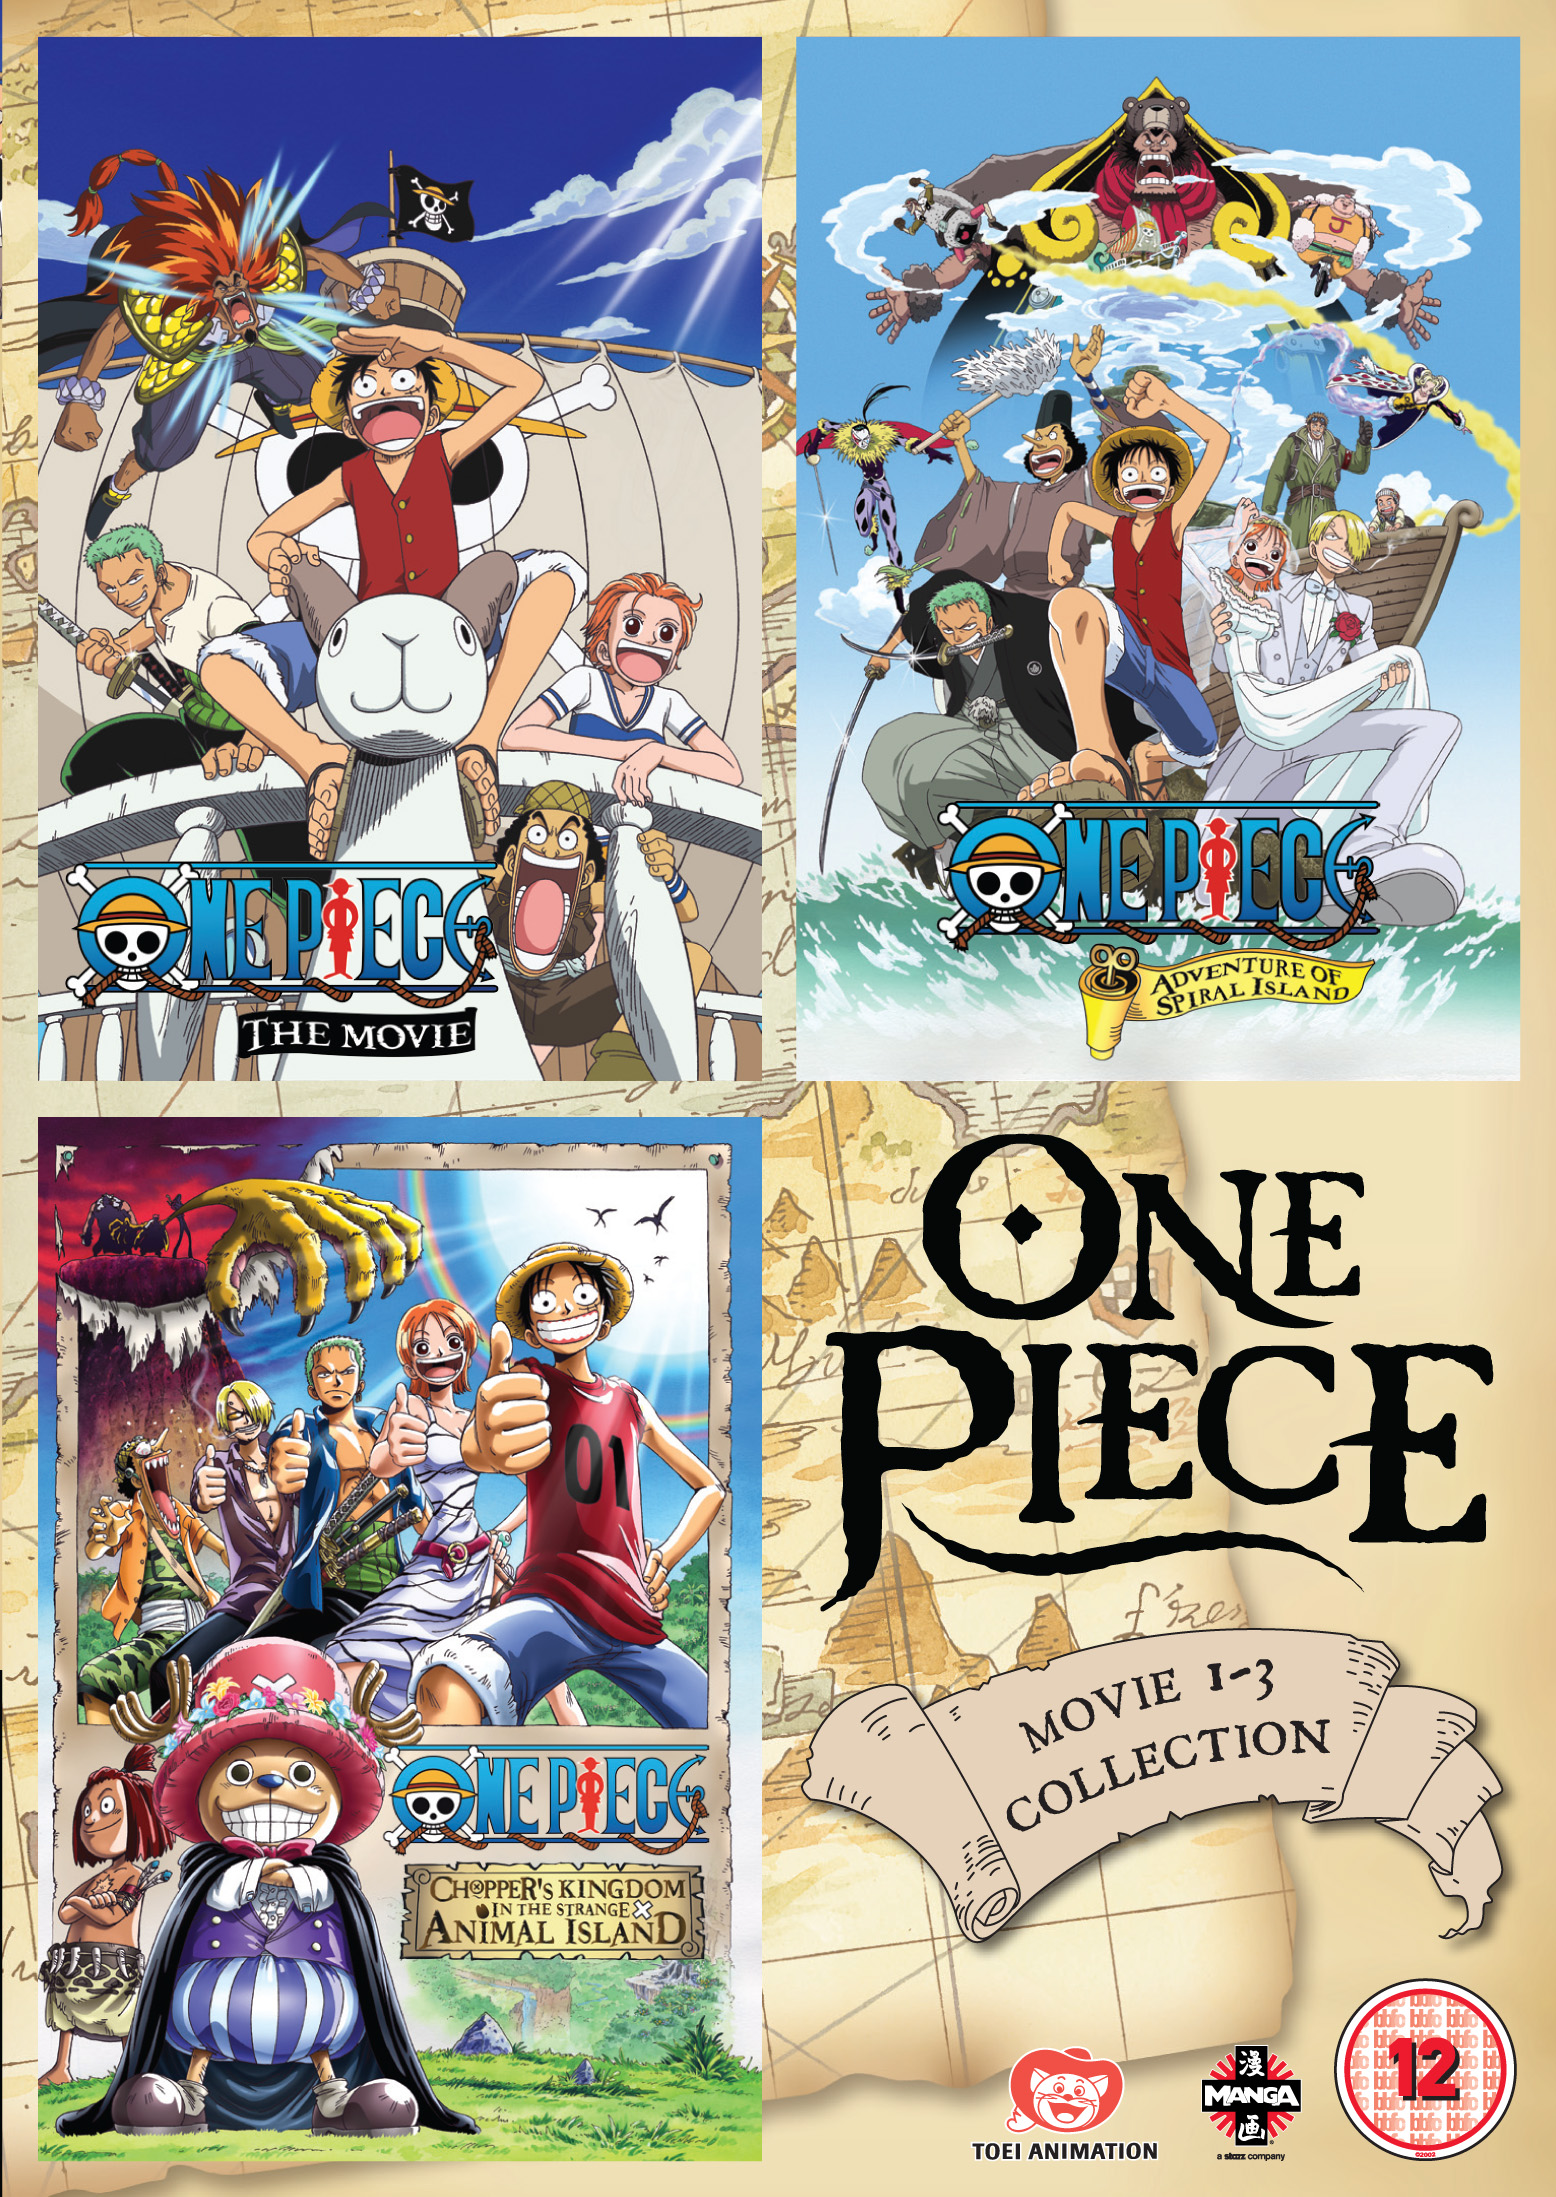 One Piece Movie Collection 1 (Movies 1-3) - Fetch Publicity